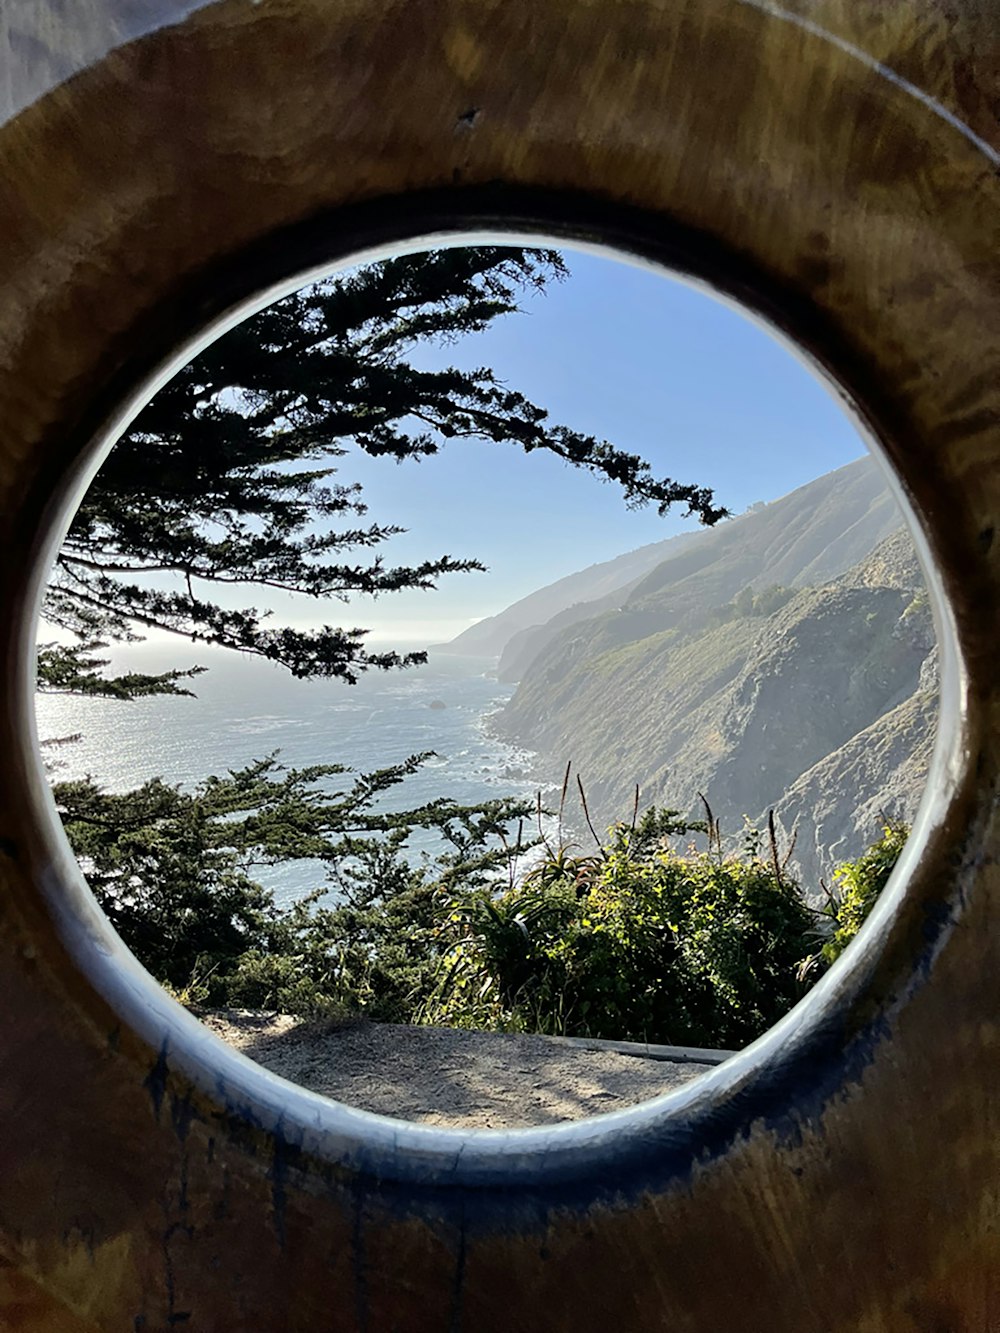 a view of a body of water through a round window